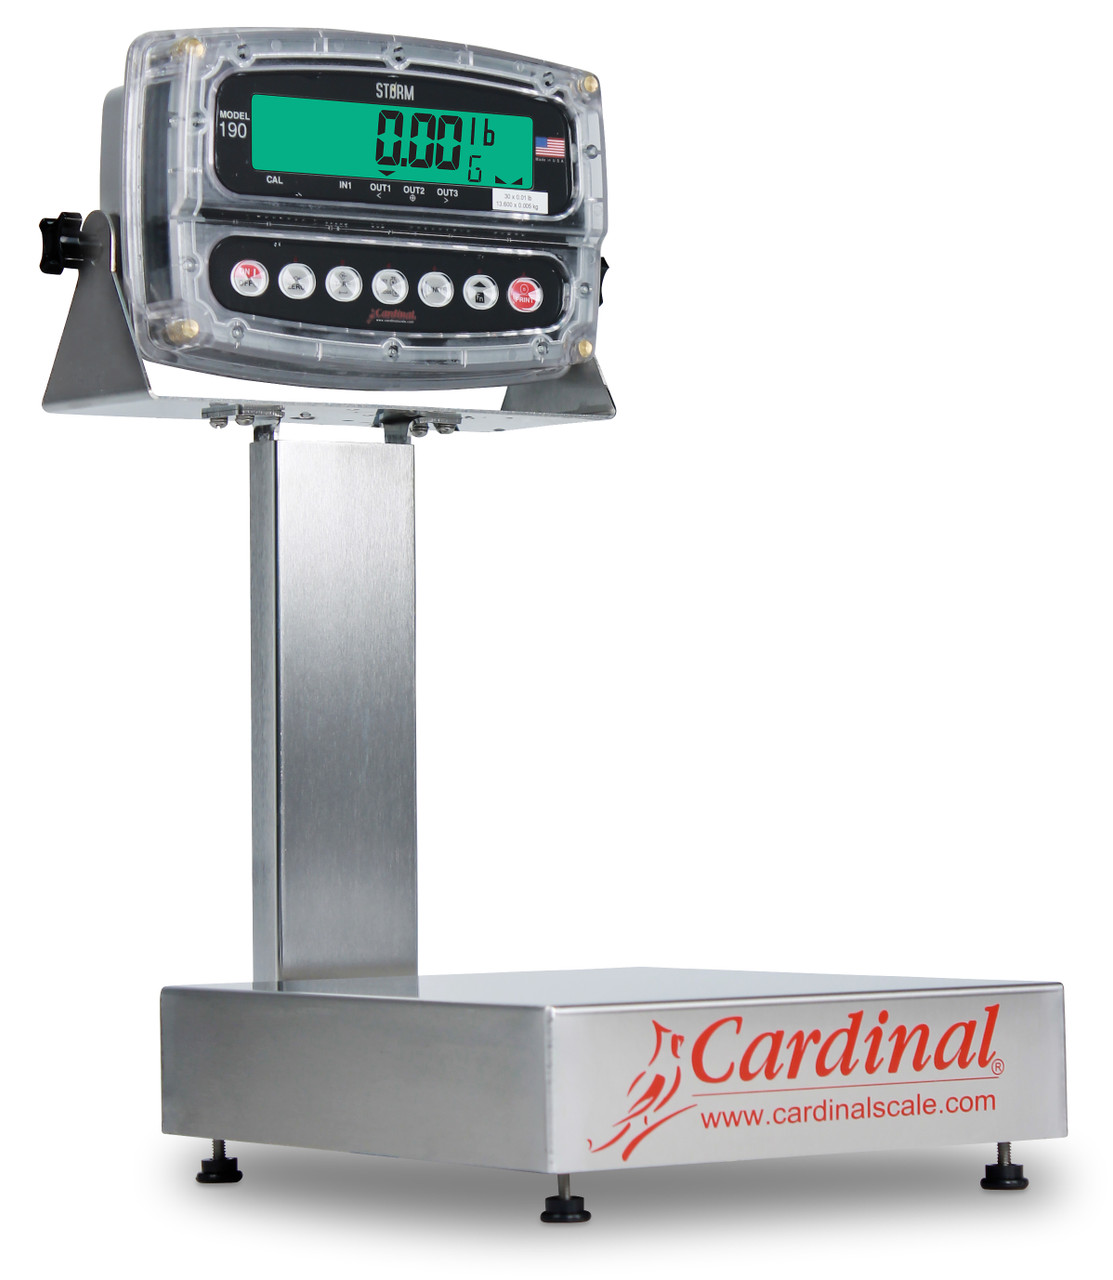 Cardinal Detecto 30 Lb Electronic Bench Scale 12" x 10" Stainless Steel 190 Indicator, Model# EB-30-190